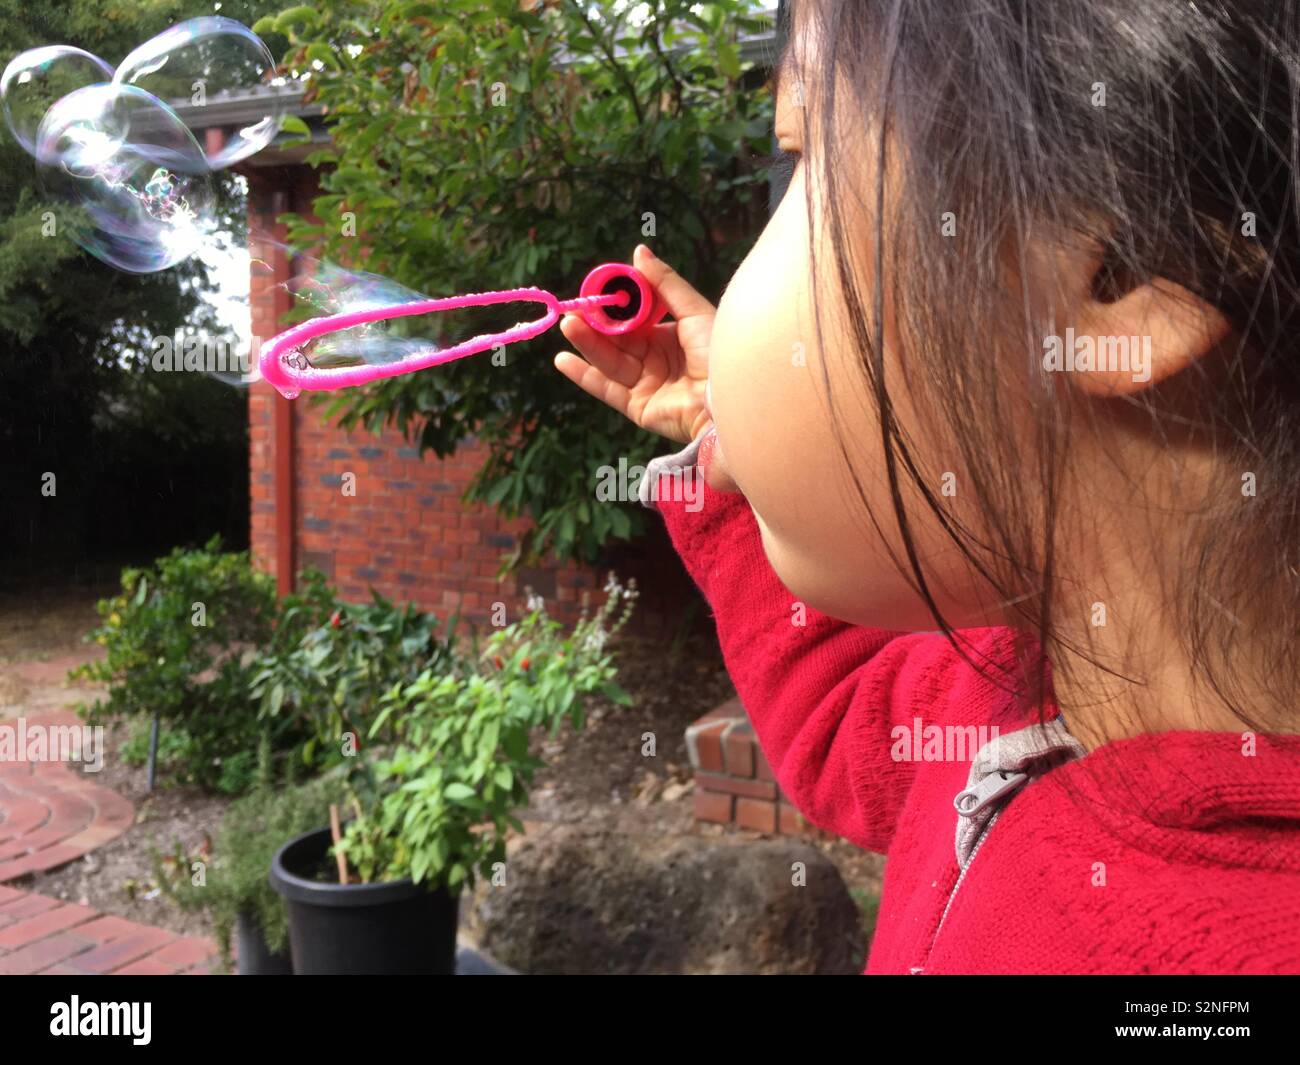 A young multi ethnic girl wearing a red hooded jumper is blowing bubbles in a backyard.  Autumn season. Stock Photo